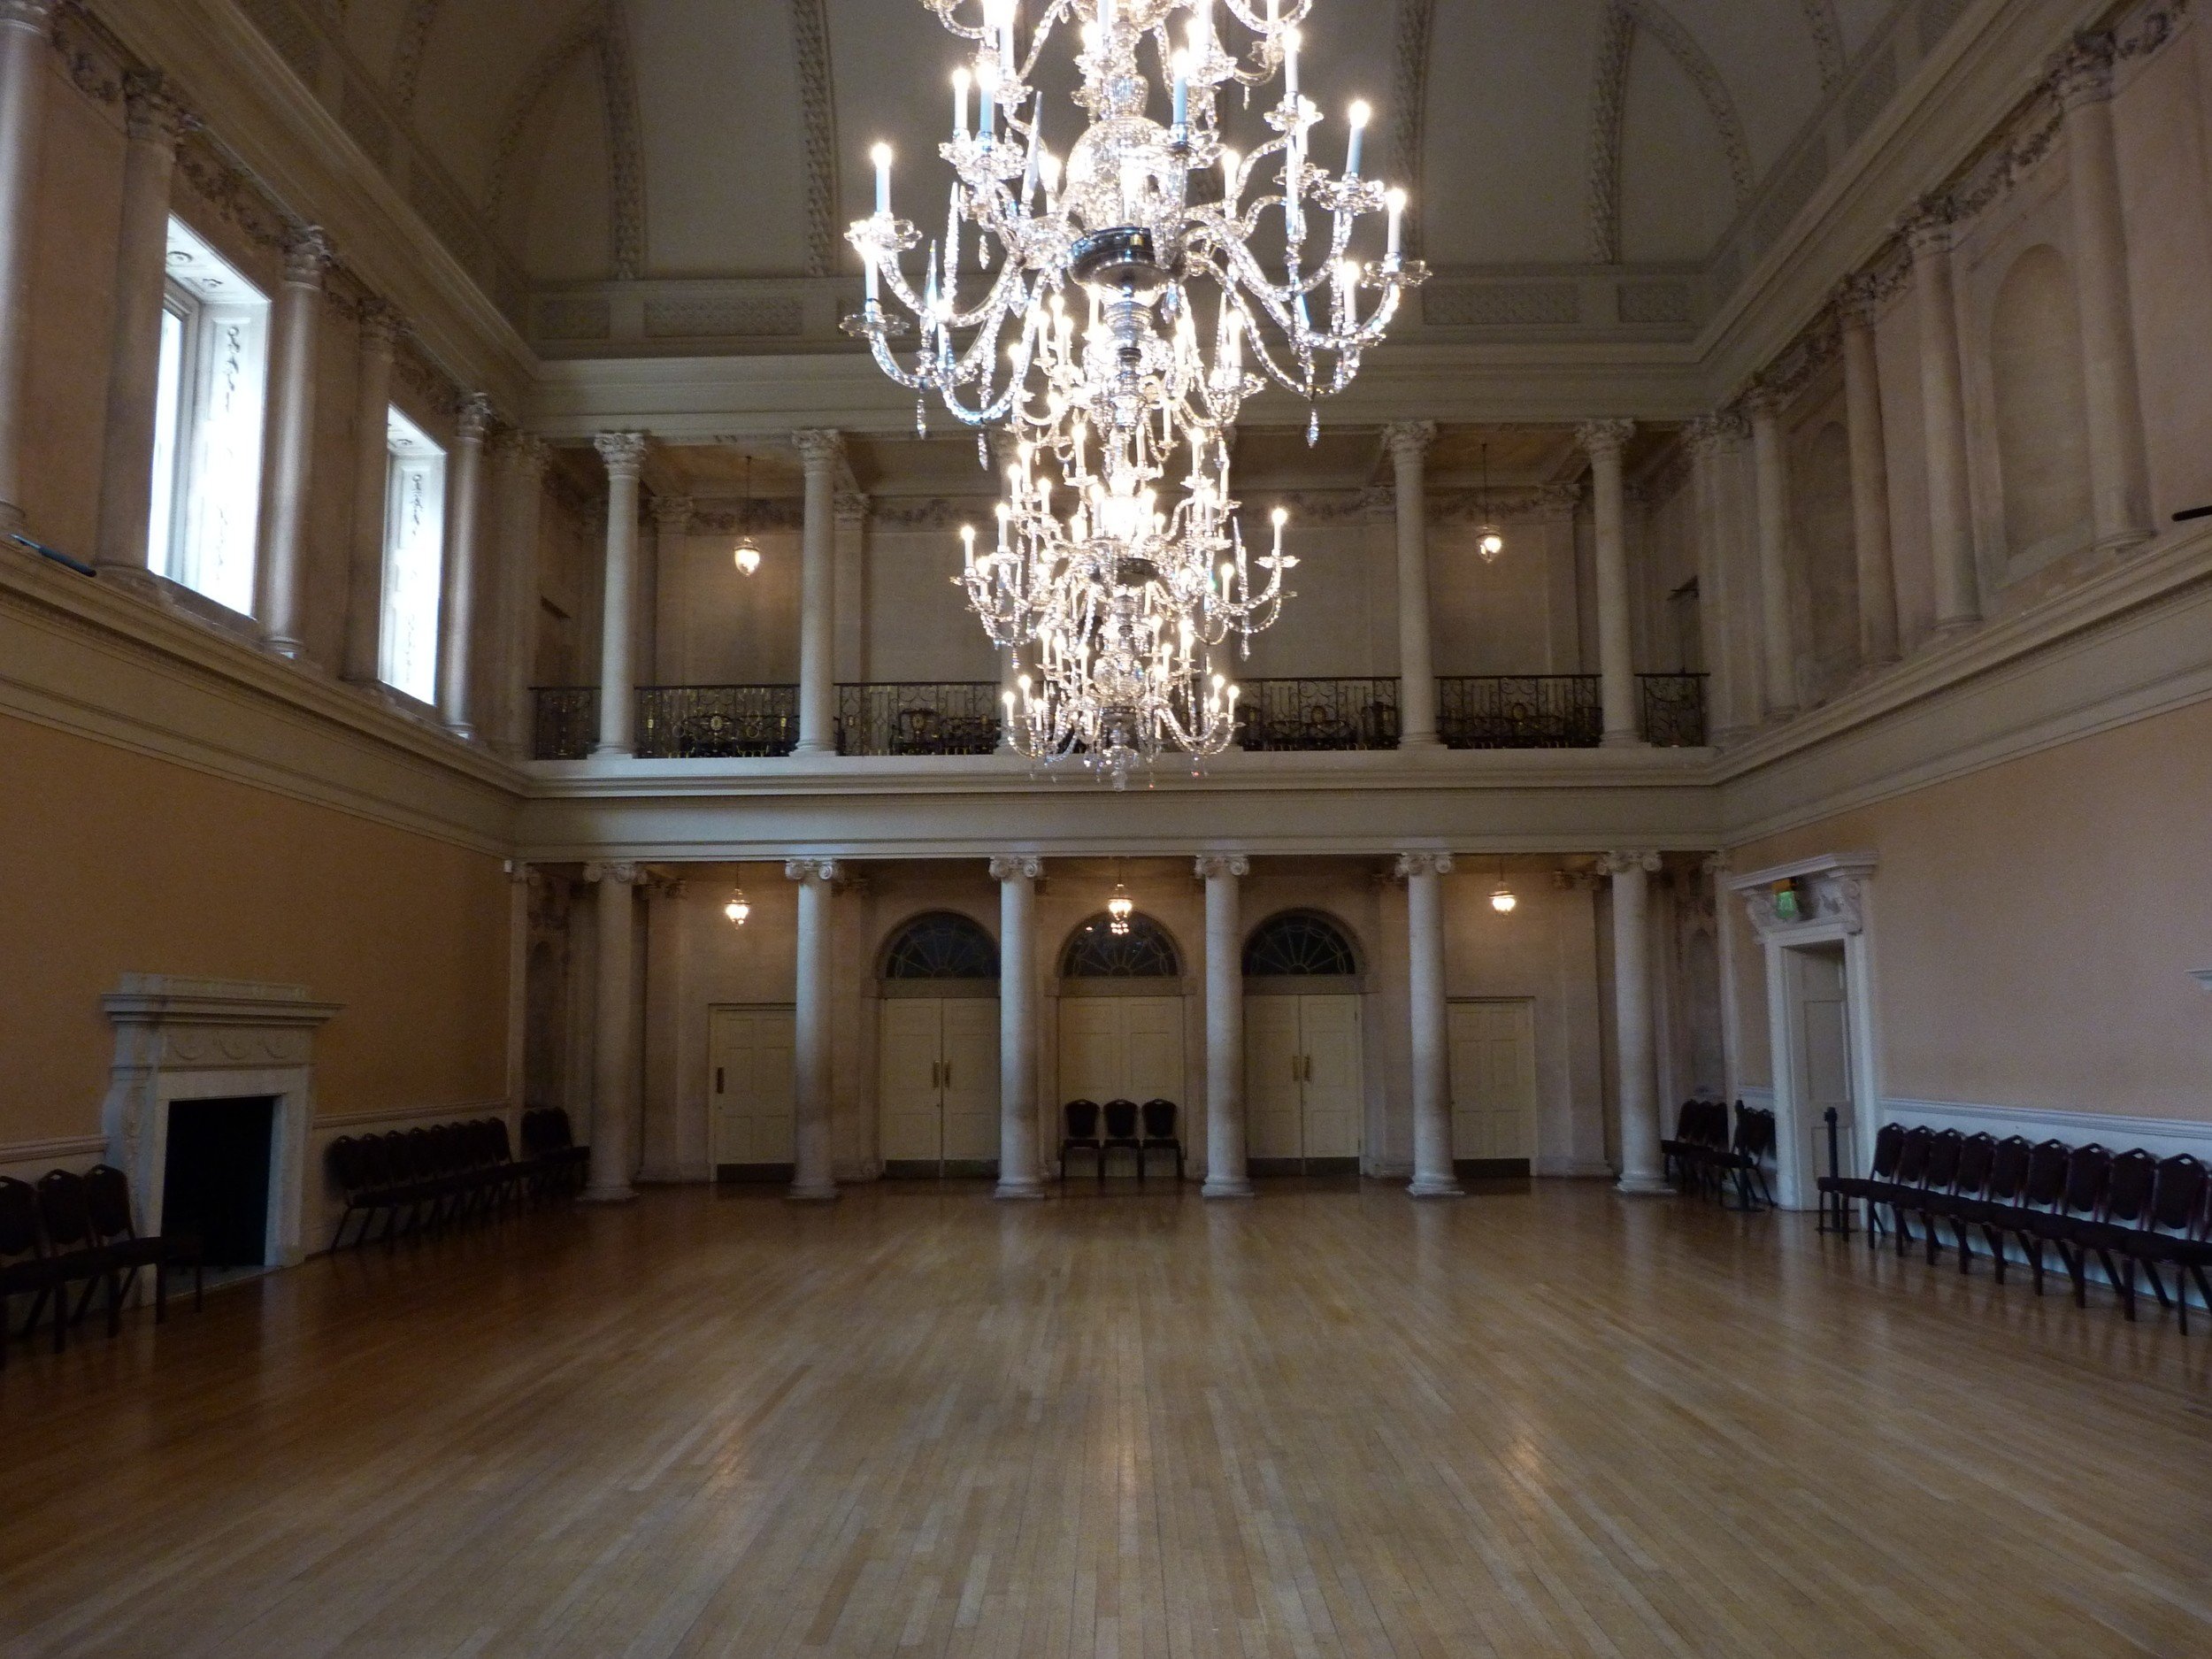 The Assembly Rooms